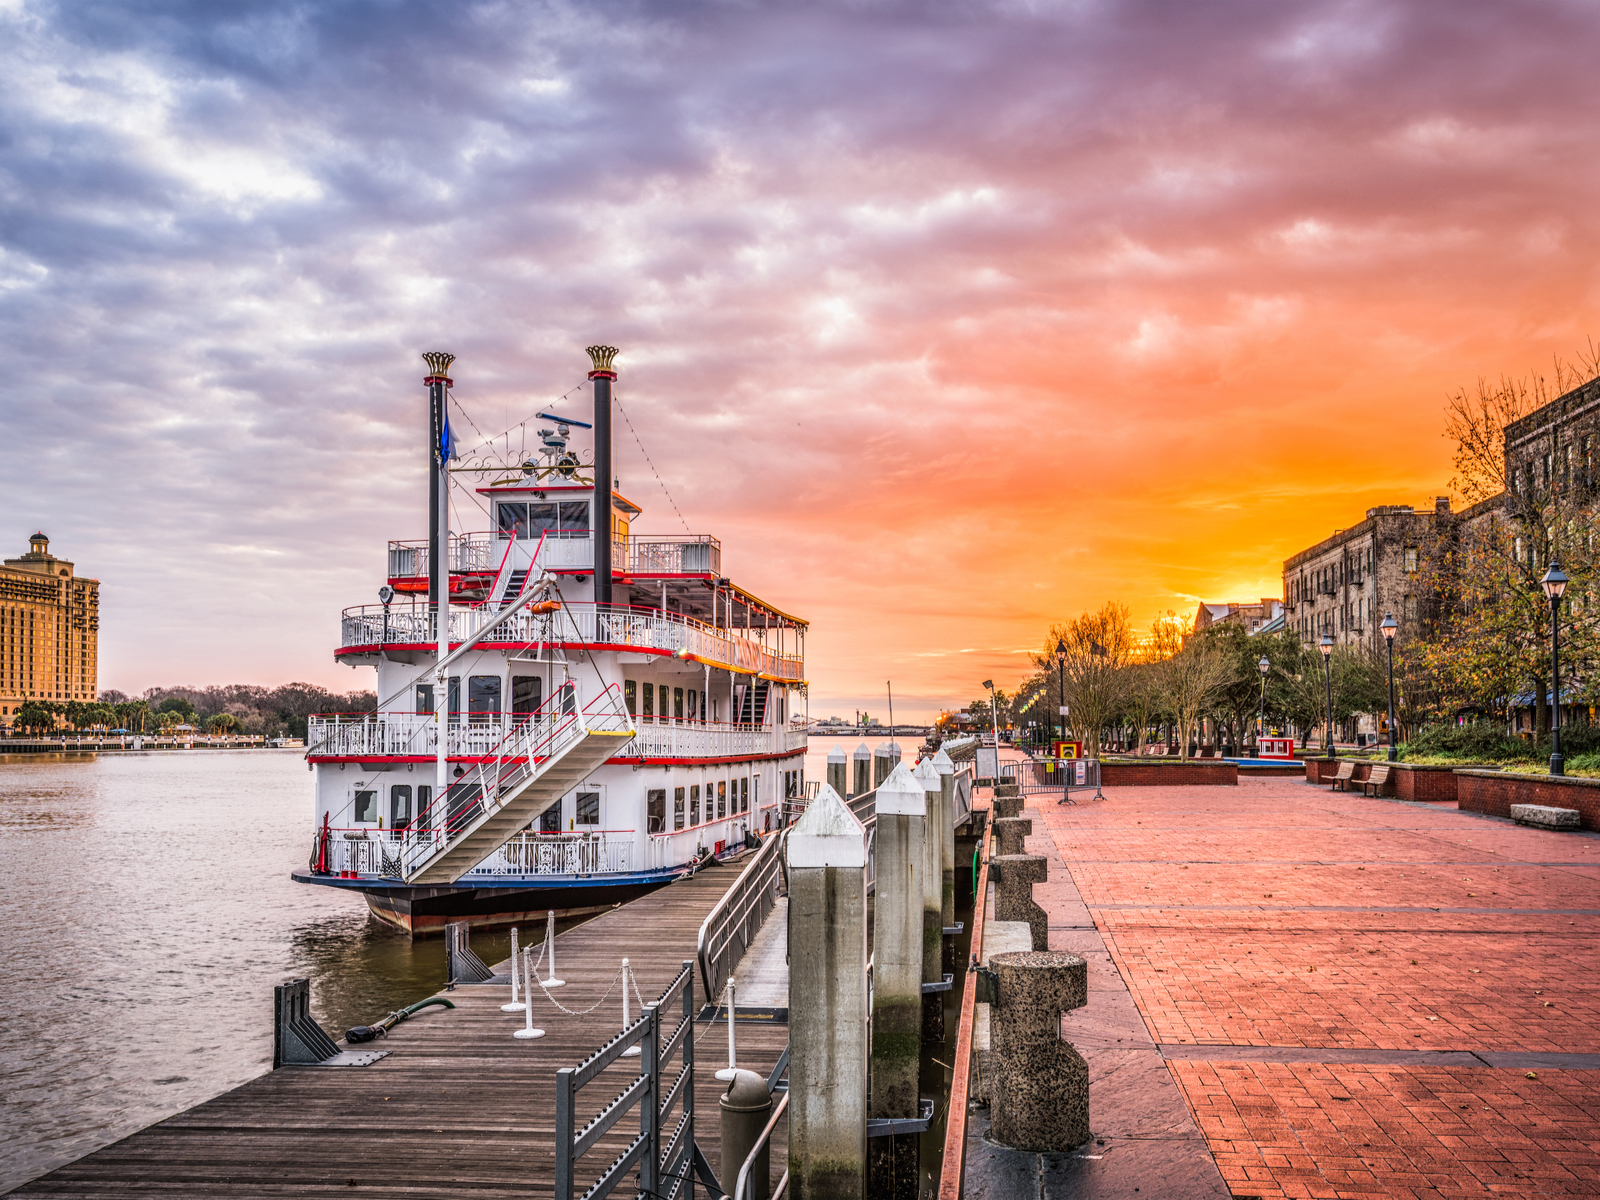 Barge on the river outside the promenade at dusk during the best time to visit Savannah GA